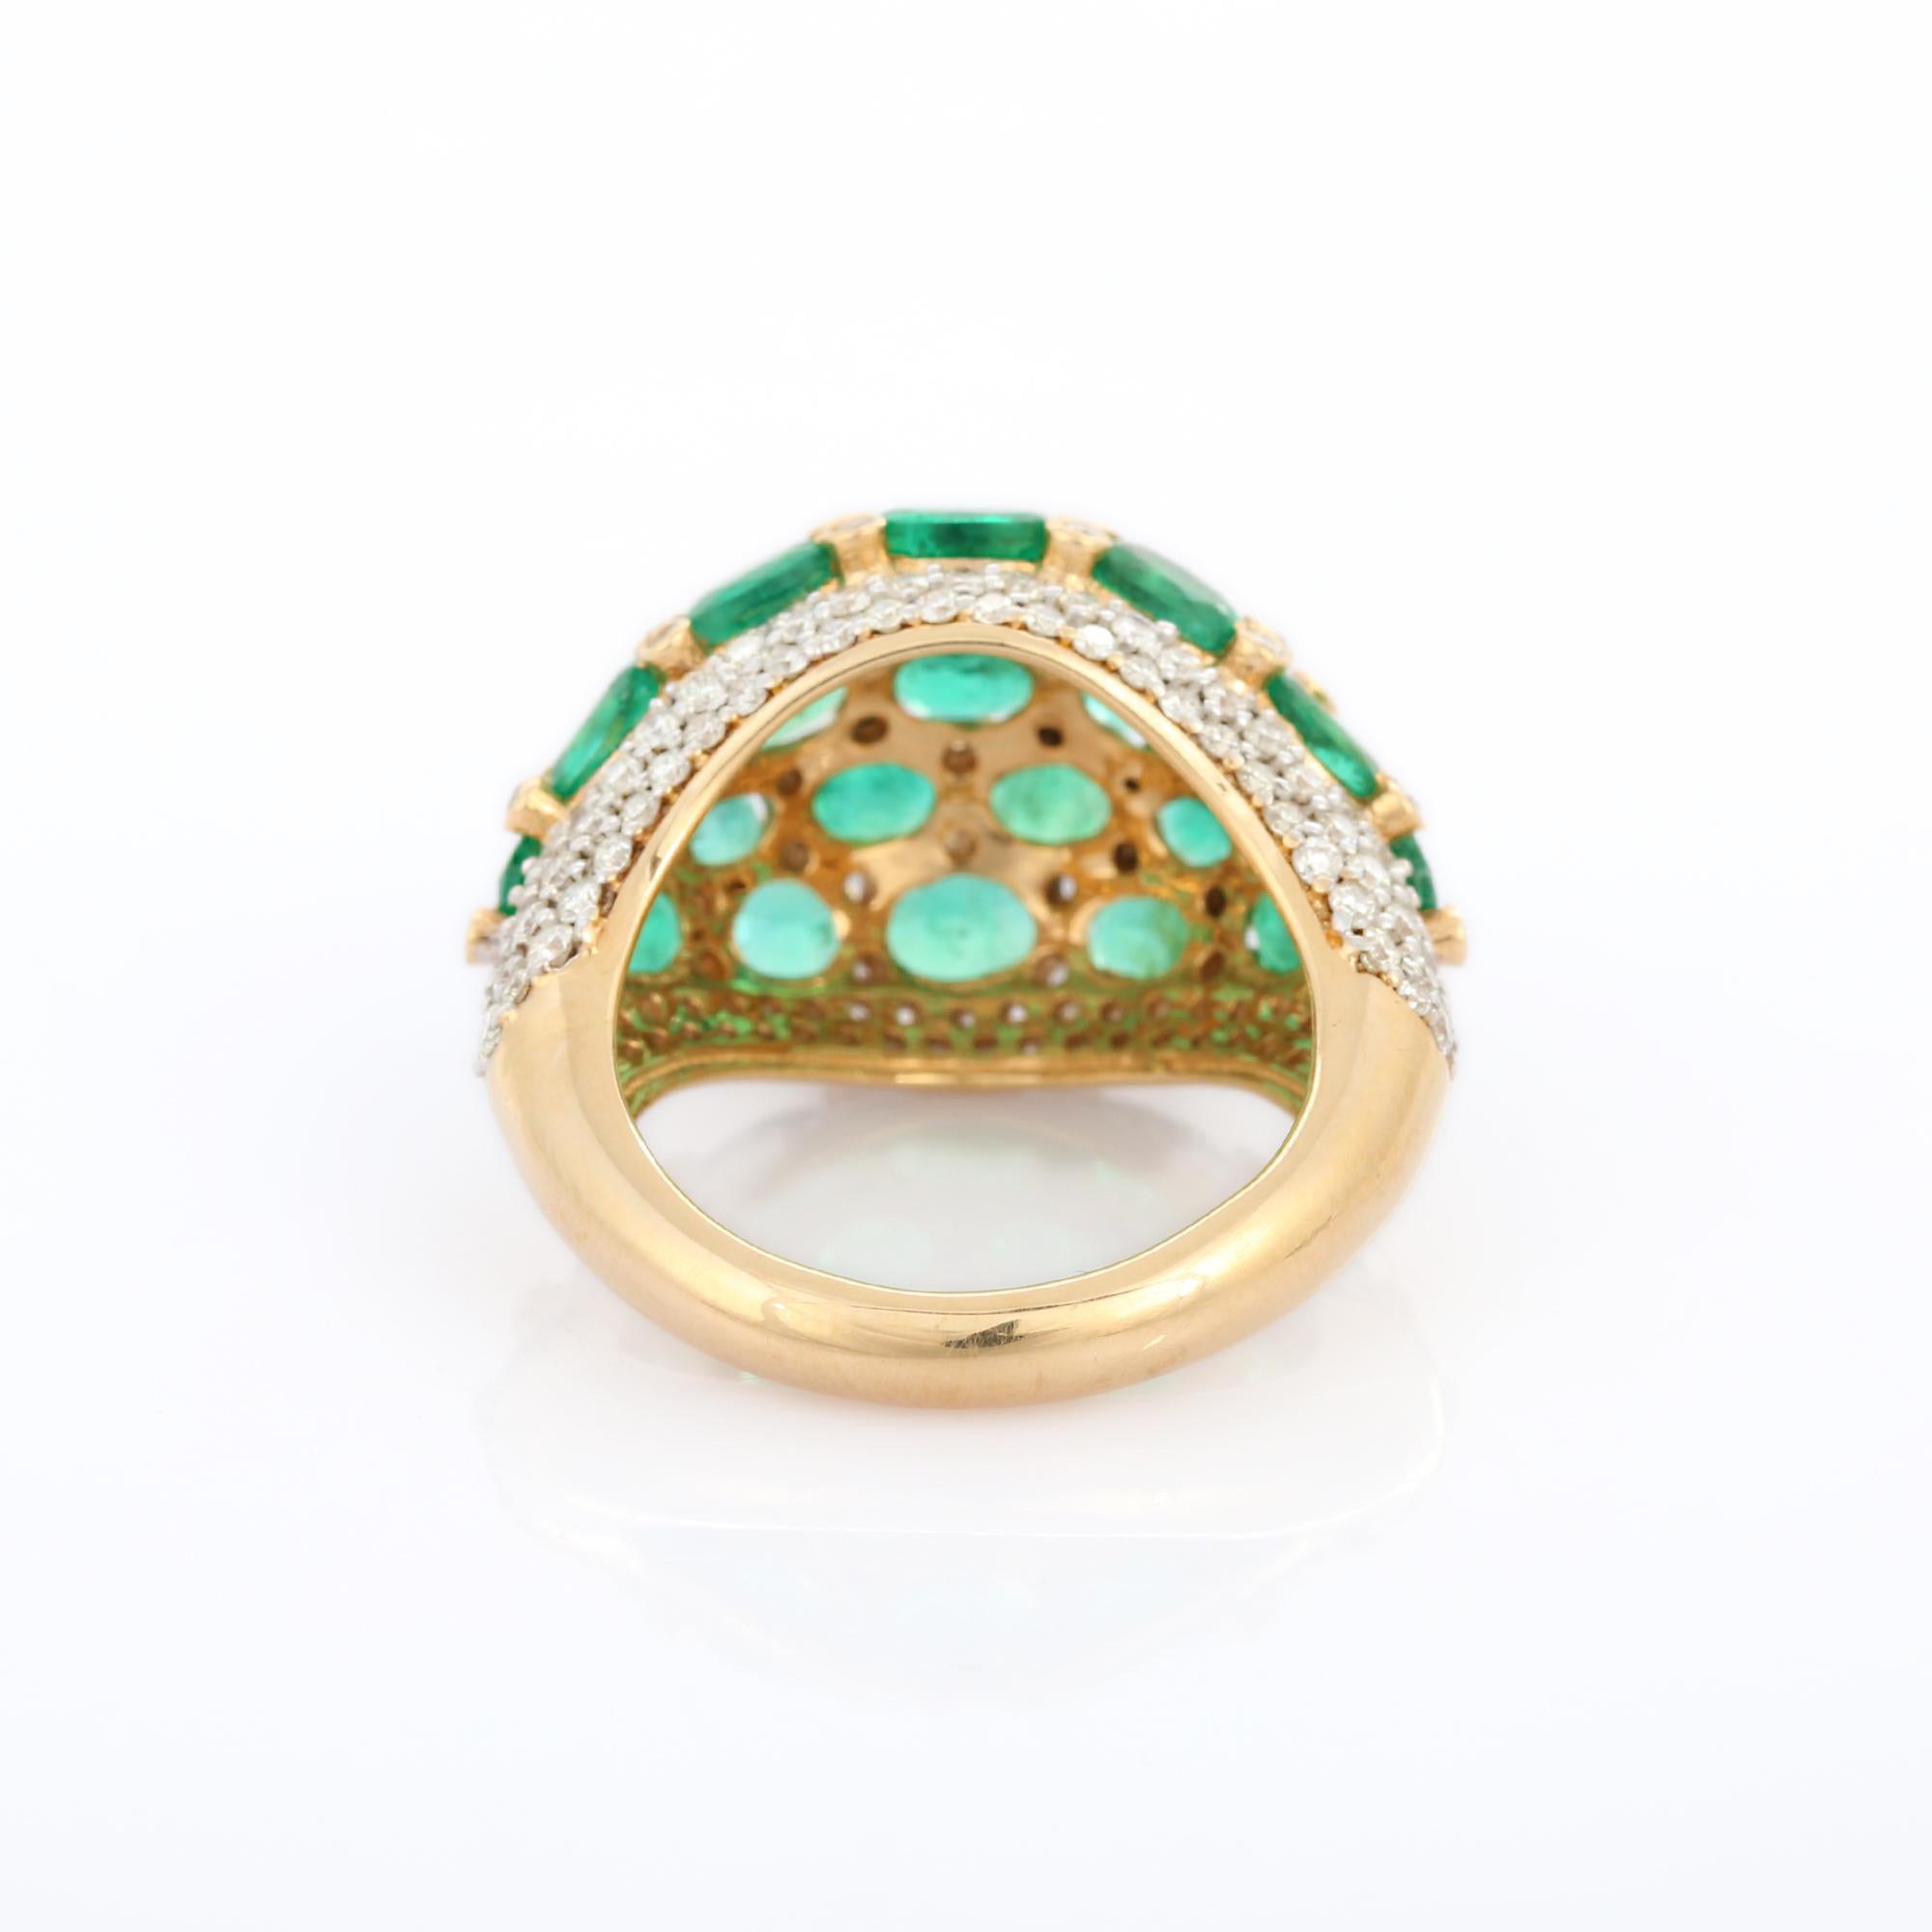 For Sale:  18k Solid Yellow Gold Emerald Diamond Cocktail Ring, Statement Emerald Ring 6